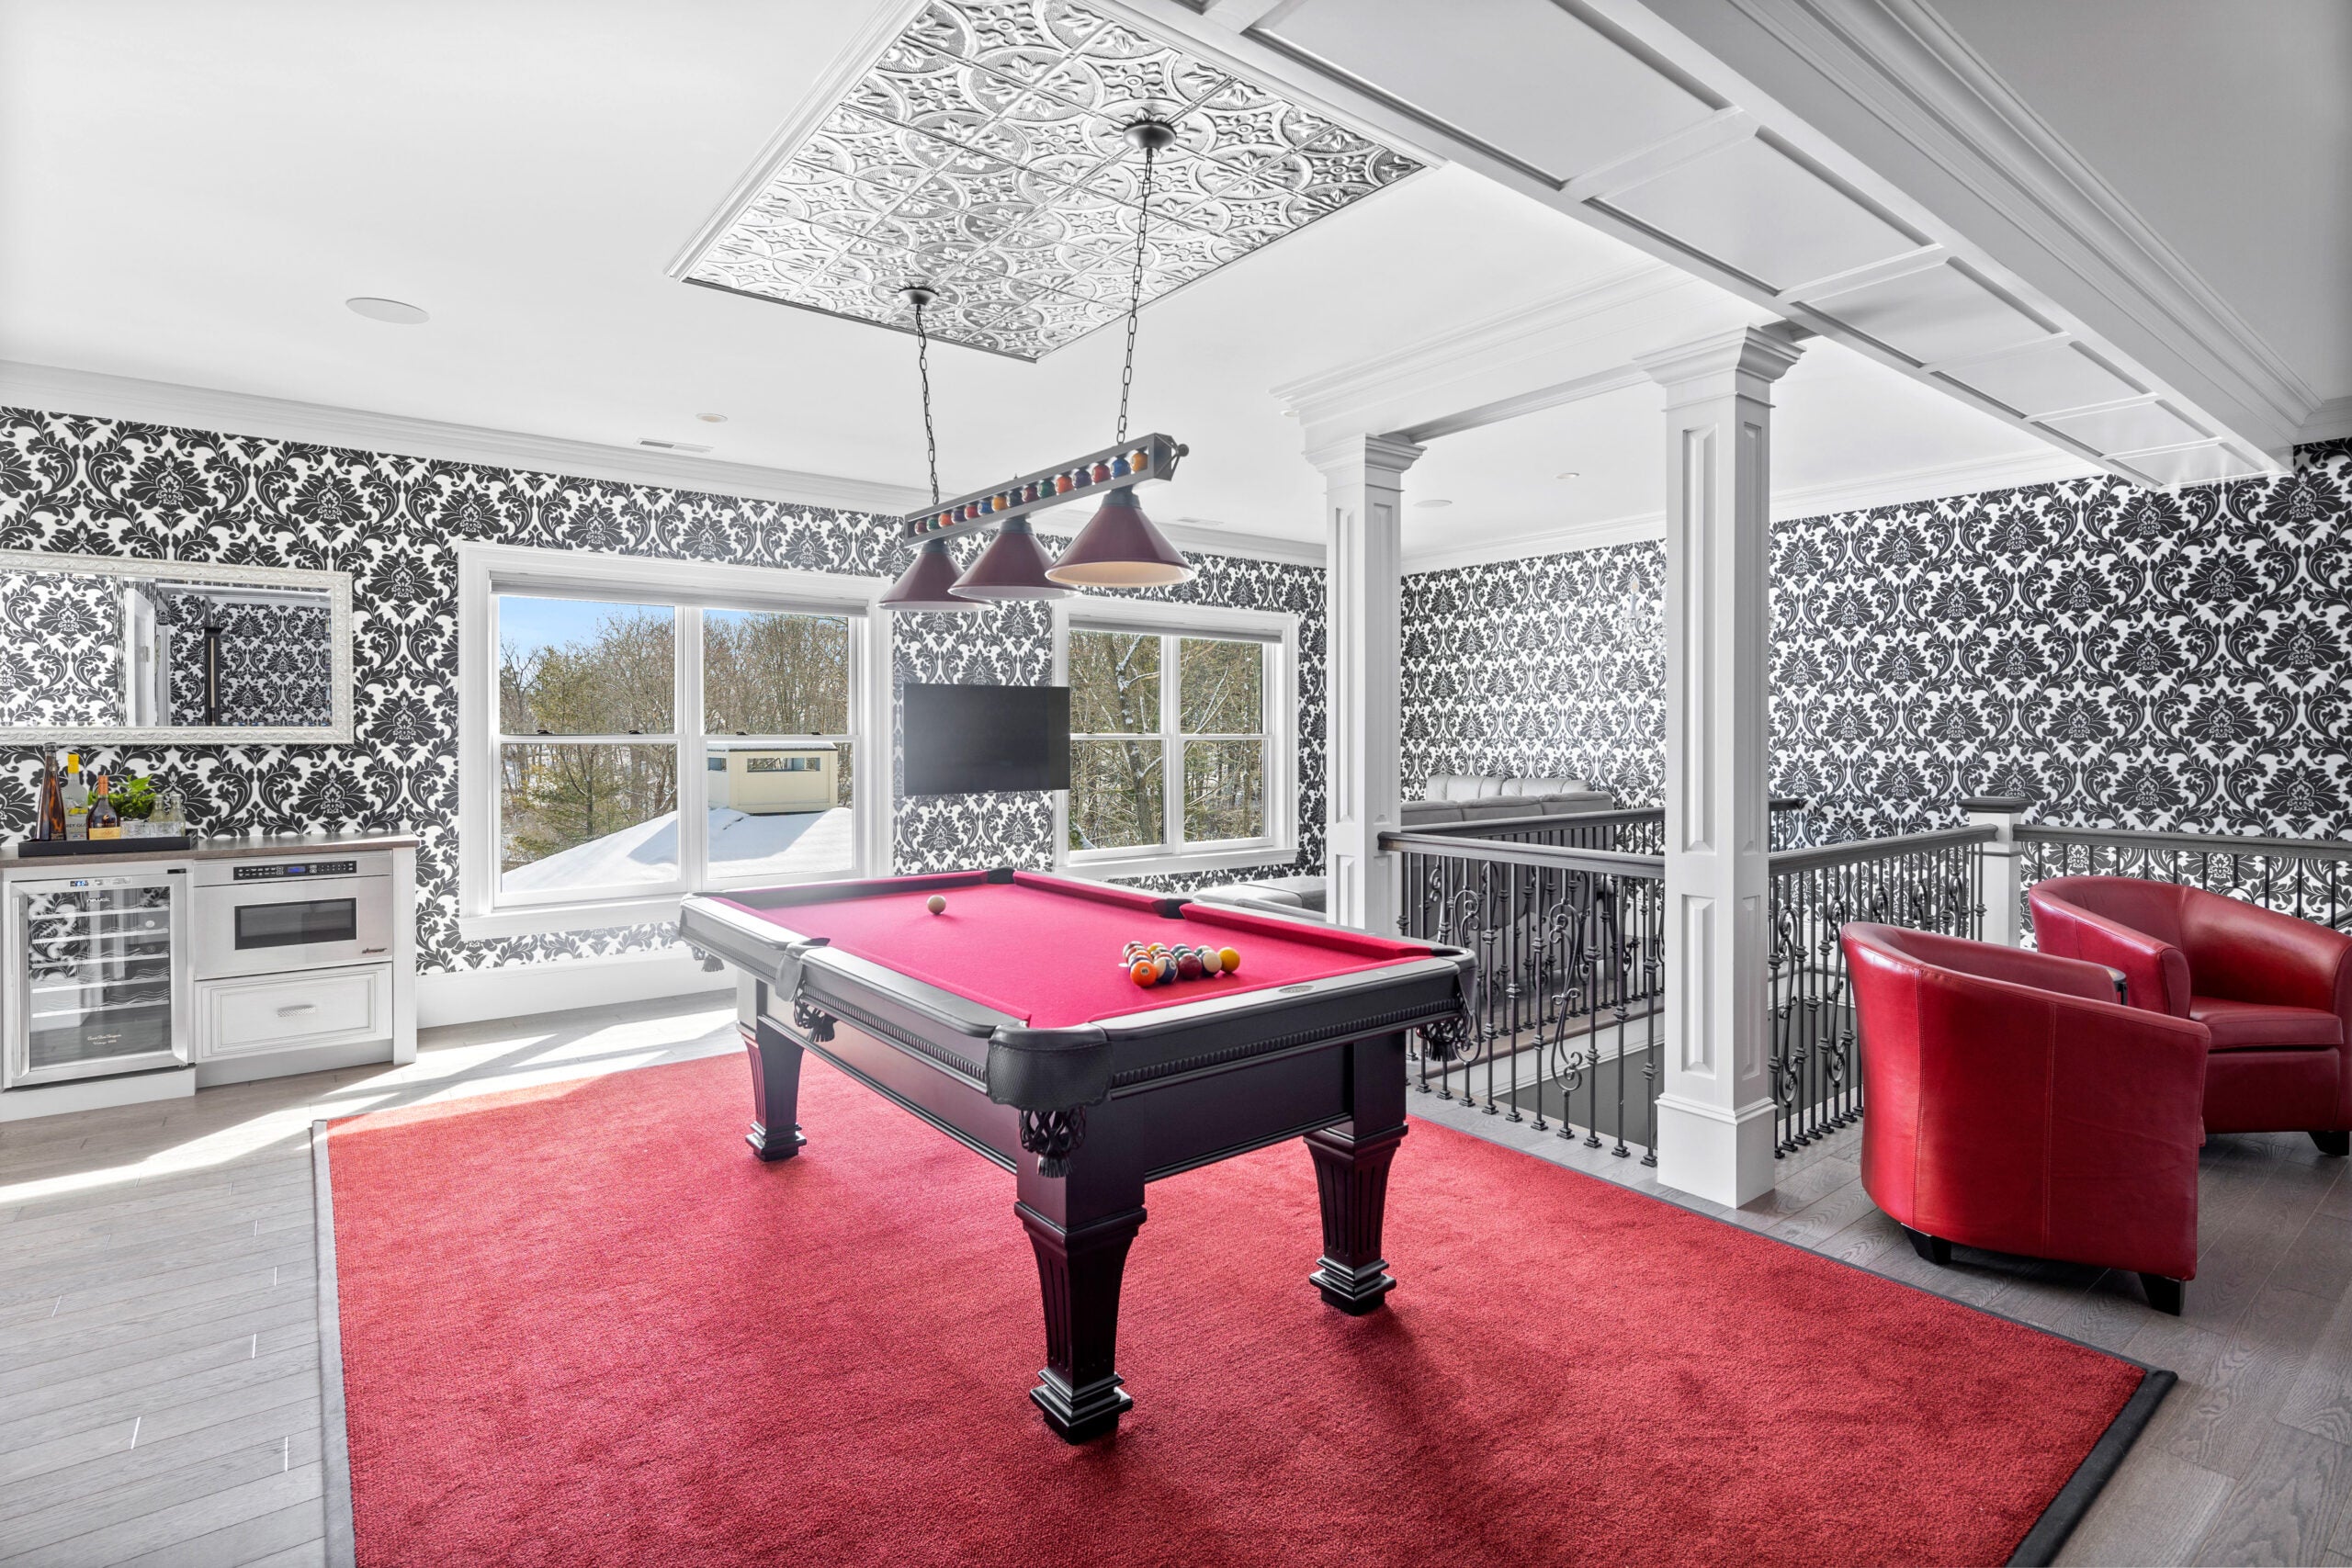 The billiards room and home movie theater are both upstairs. The billiards room has plush red carpeting and black and white wallpapered walls.